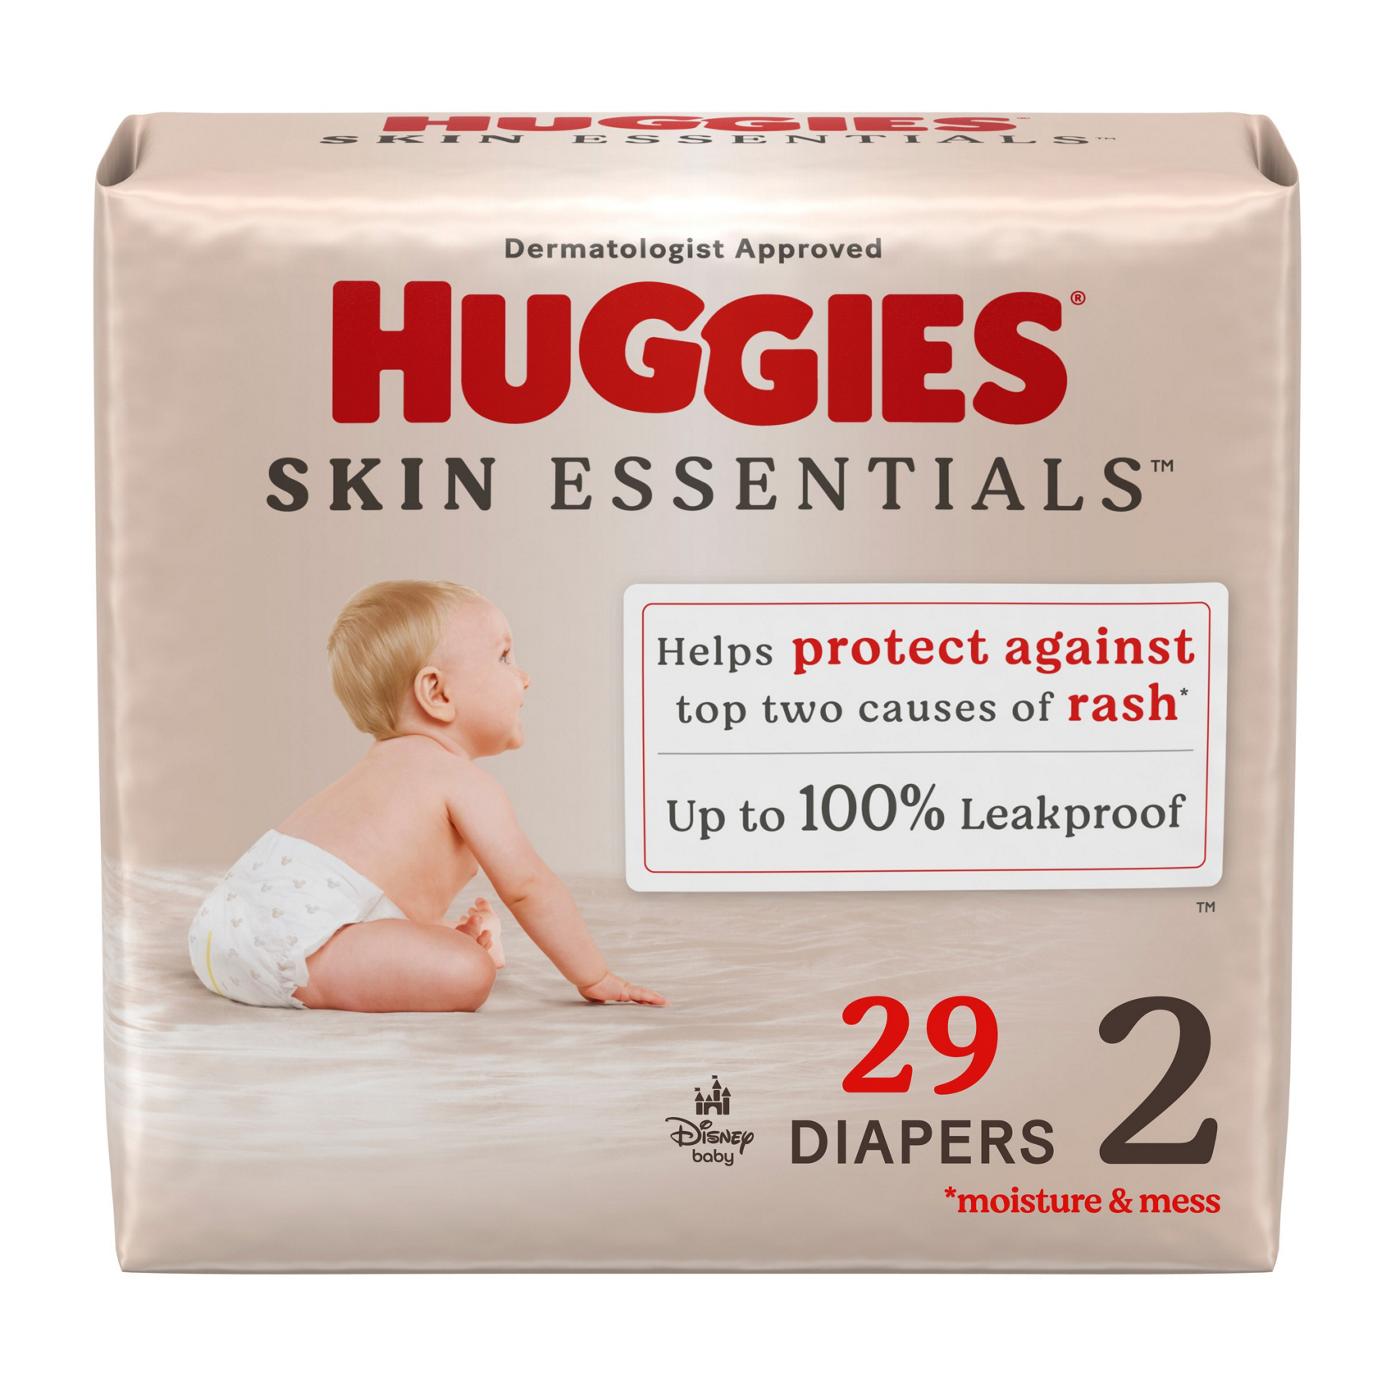 Huggies Skin Essentials Baby Diapers - Size 2; image 1 of 7